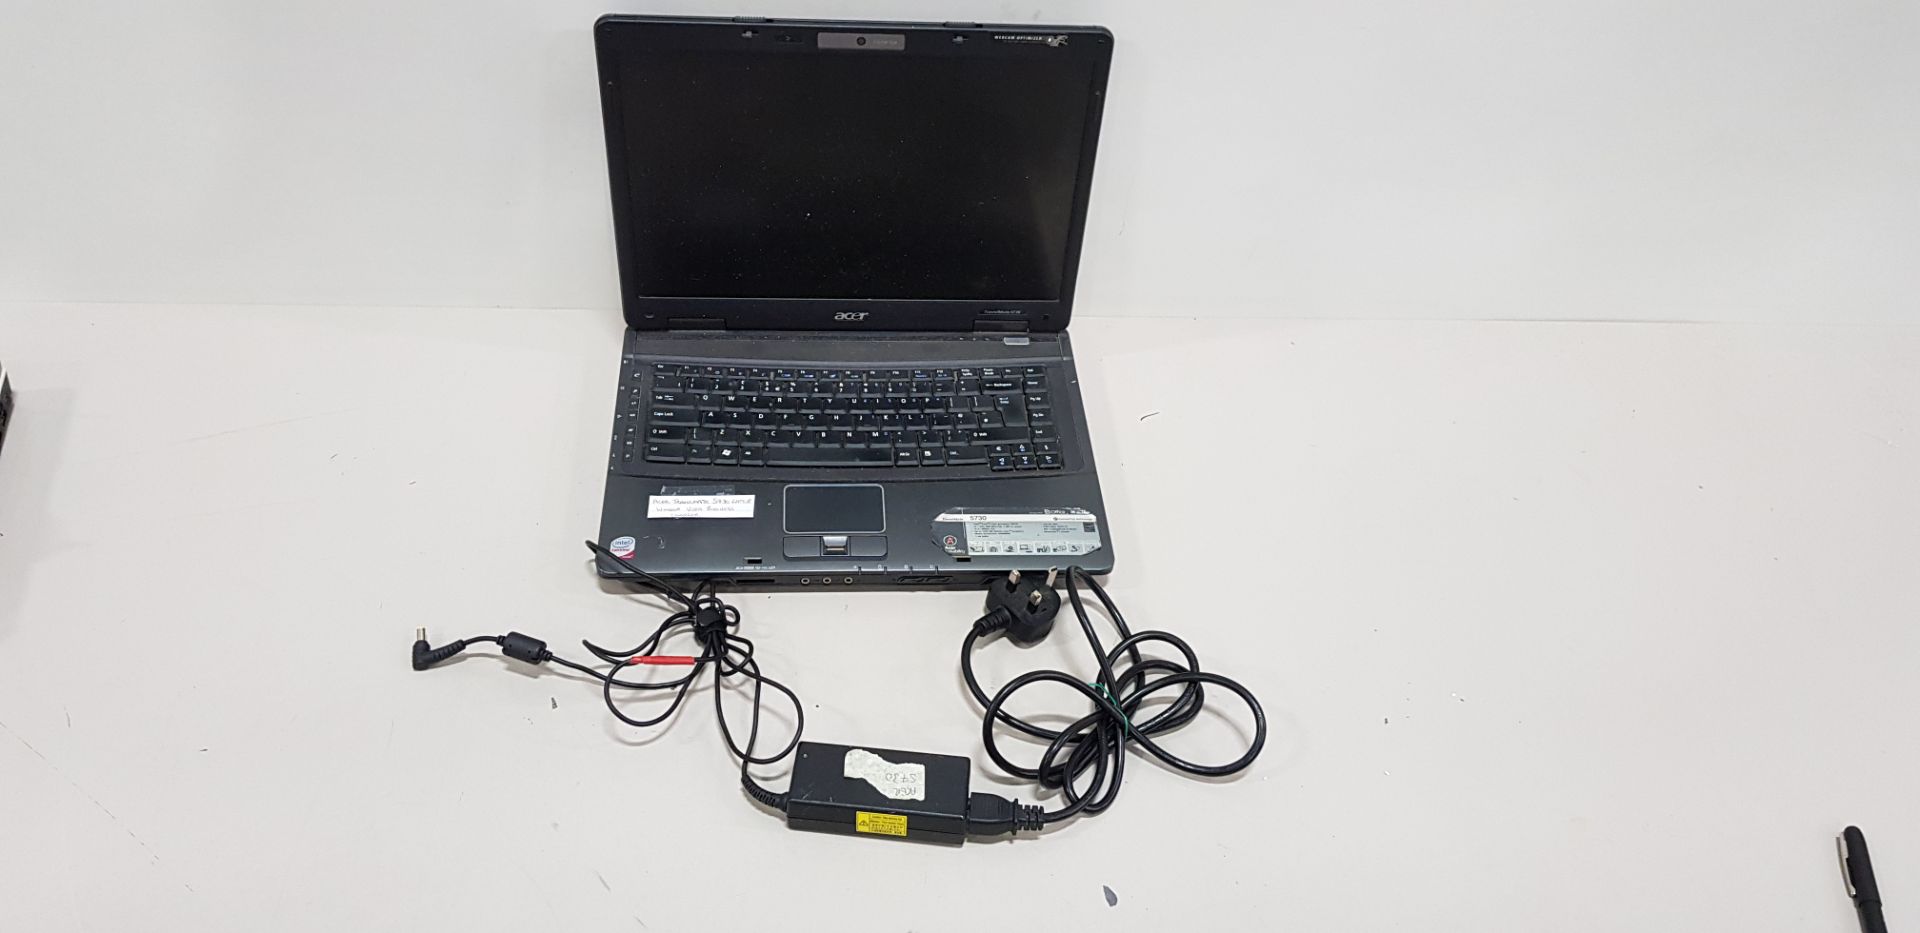 ACER TRAVELMATE 5730 LAPTOP WINDOWS VISTA BUSINESS INCLUDES CHARGER